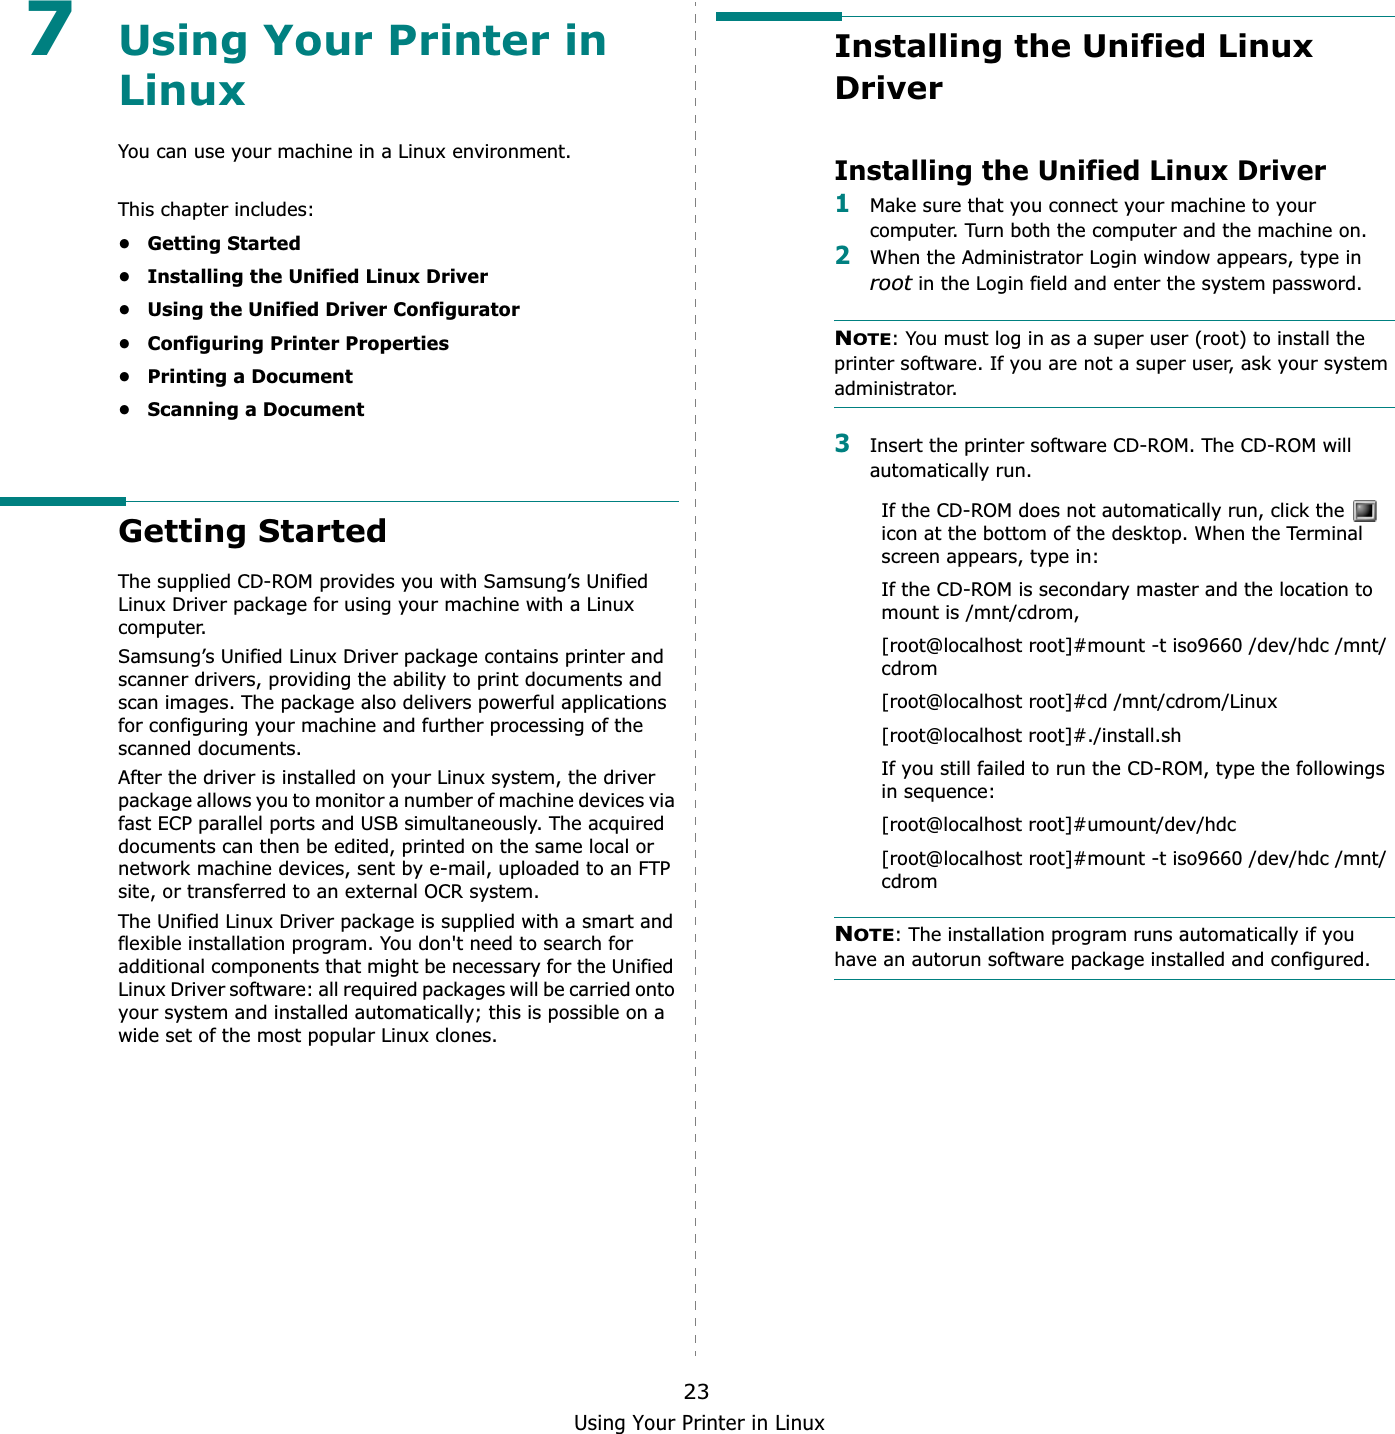 Using Your Printer in Linux237Using Your Printer in LinuxYou can use your machine in a Linux environment. This chapter includes:• Getting Started• Installing the Unified Linux Driver• Using the Unified Driver Configurator• Configuring Printer Properties• Printing a Document• Scanning a DocumentGetting StartedThe supplied CD-ROM provides you with Samsung’s Unified Linux Driver package for using your machine with a Linux computer.Samsung’s Unified Linux Driver package contains printer and scanner drivers, providing the ability to print documents and scan images. The package also delivers powerful applications for configuring your machine and further processing of the scanned documents.After the driver is installed on your Linux system, the driver package allows you to monitor a number of machine devices via fast ECP parallel ports and USB simultaneously. The acquired documents can then be edited, printed on the same local or network machine devices, sent by e-mail, uploaded to an FTP site, or transferred to an external OCR system.The Unified Linux Driver package is supplied with a smart and flexible installation program. You don&apos;t need to search for additional components that might be necessary for the Unified Linux Driver software: all required packages will be carried onto your system and installed automatically; this is possible on a wide set of the most popular Linux clones.Installing the Unified Linux DriverInstalling the Unified Linux Driver1Make sure that you connect your machine to your computer. Turn both the computer and the machine on.2When the Administrator Login window appears, type in root in the Login field and enter the system password.NOTE: You must log in as a super user (root) to install the printer software. If you are not a super user, ask your system administrator.3Insert the printer software CD-ROM. The CD-ROM will automatically run.If the CD-ROM does not automatically run, click the   icon at the bottom of the desktop. When the Terminal screen appears, type in:If the CD-ROM is secondary master and the location to mount is /mnt/cdrom,[root@localhost root]#mount -t iso9660 /dev/hdc /mnt/cdrom[root@localhost root]#cd /mnt/cdrom/Linux[root@localhost root]#./install.sh If you still failed to run the CD-ROM, type the followings in sequence:[root@localhost root]#umount/dev/hdc[root@localhost root]#mount -t iso9660 /dev/hdc /mnt/cdromNOTE: The installation program runs automatically if you have an autorun software package installed and configured.